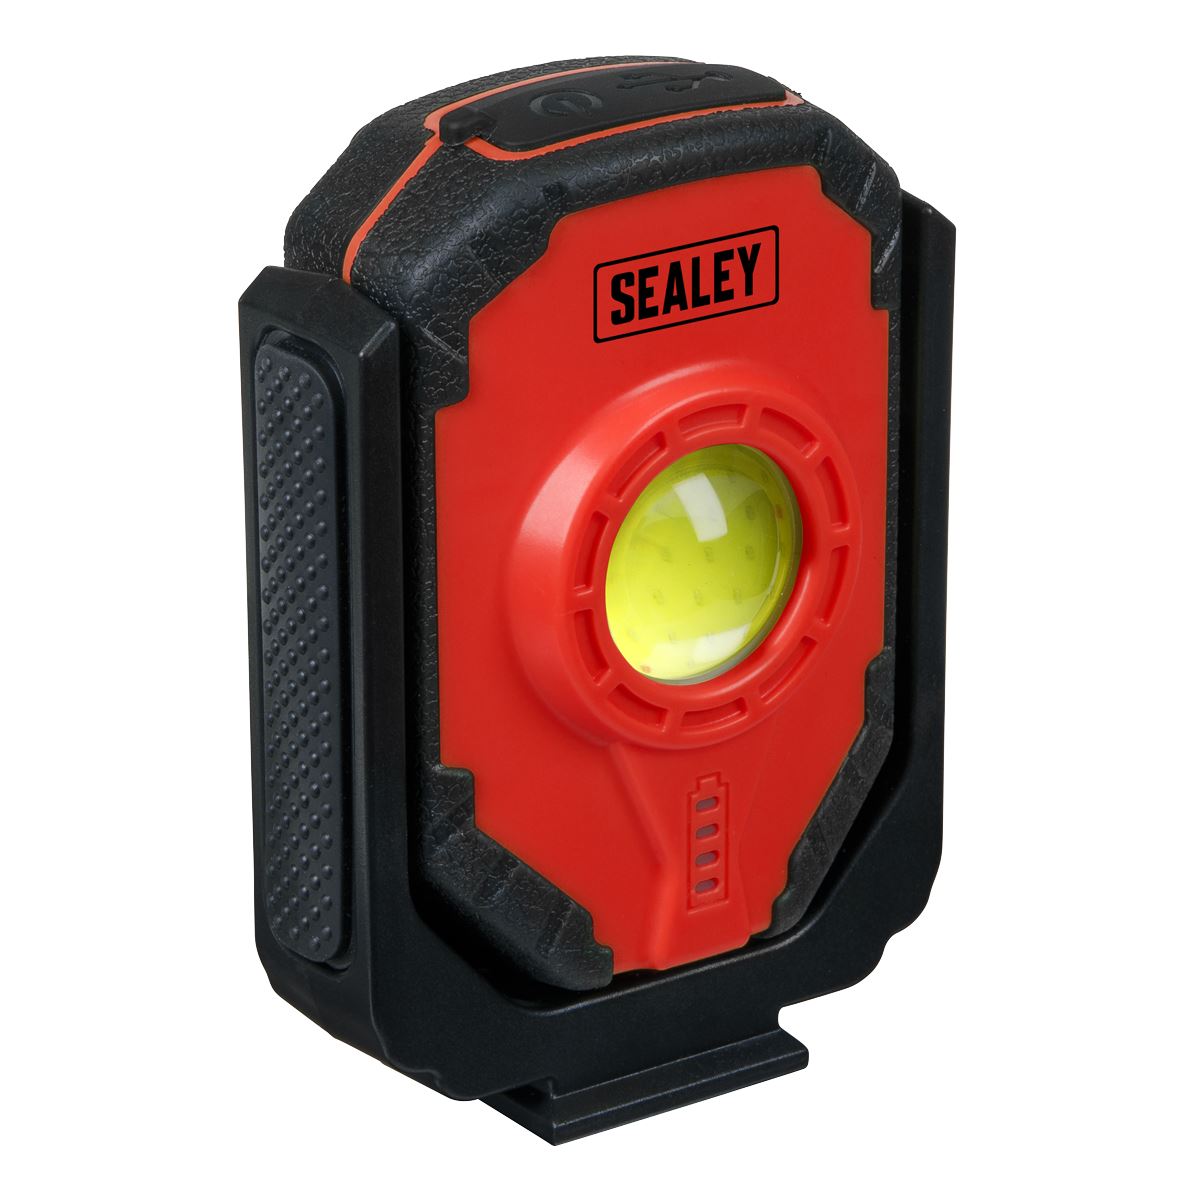 Sealey Rechargeable Worklight 15W COB LED